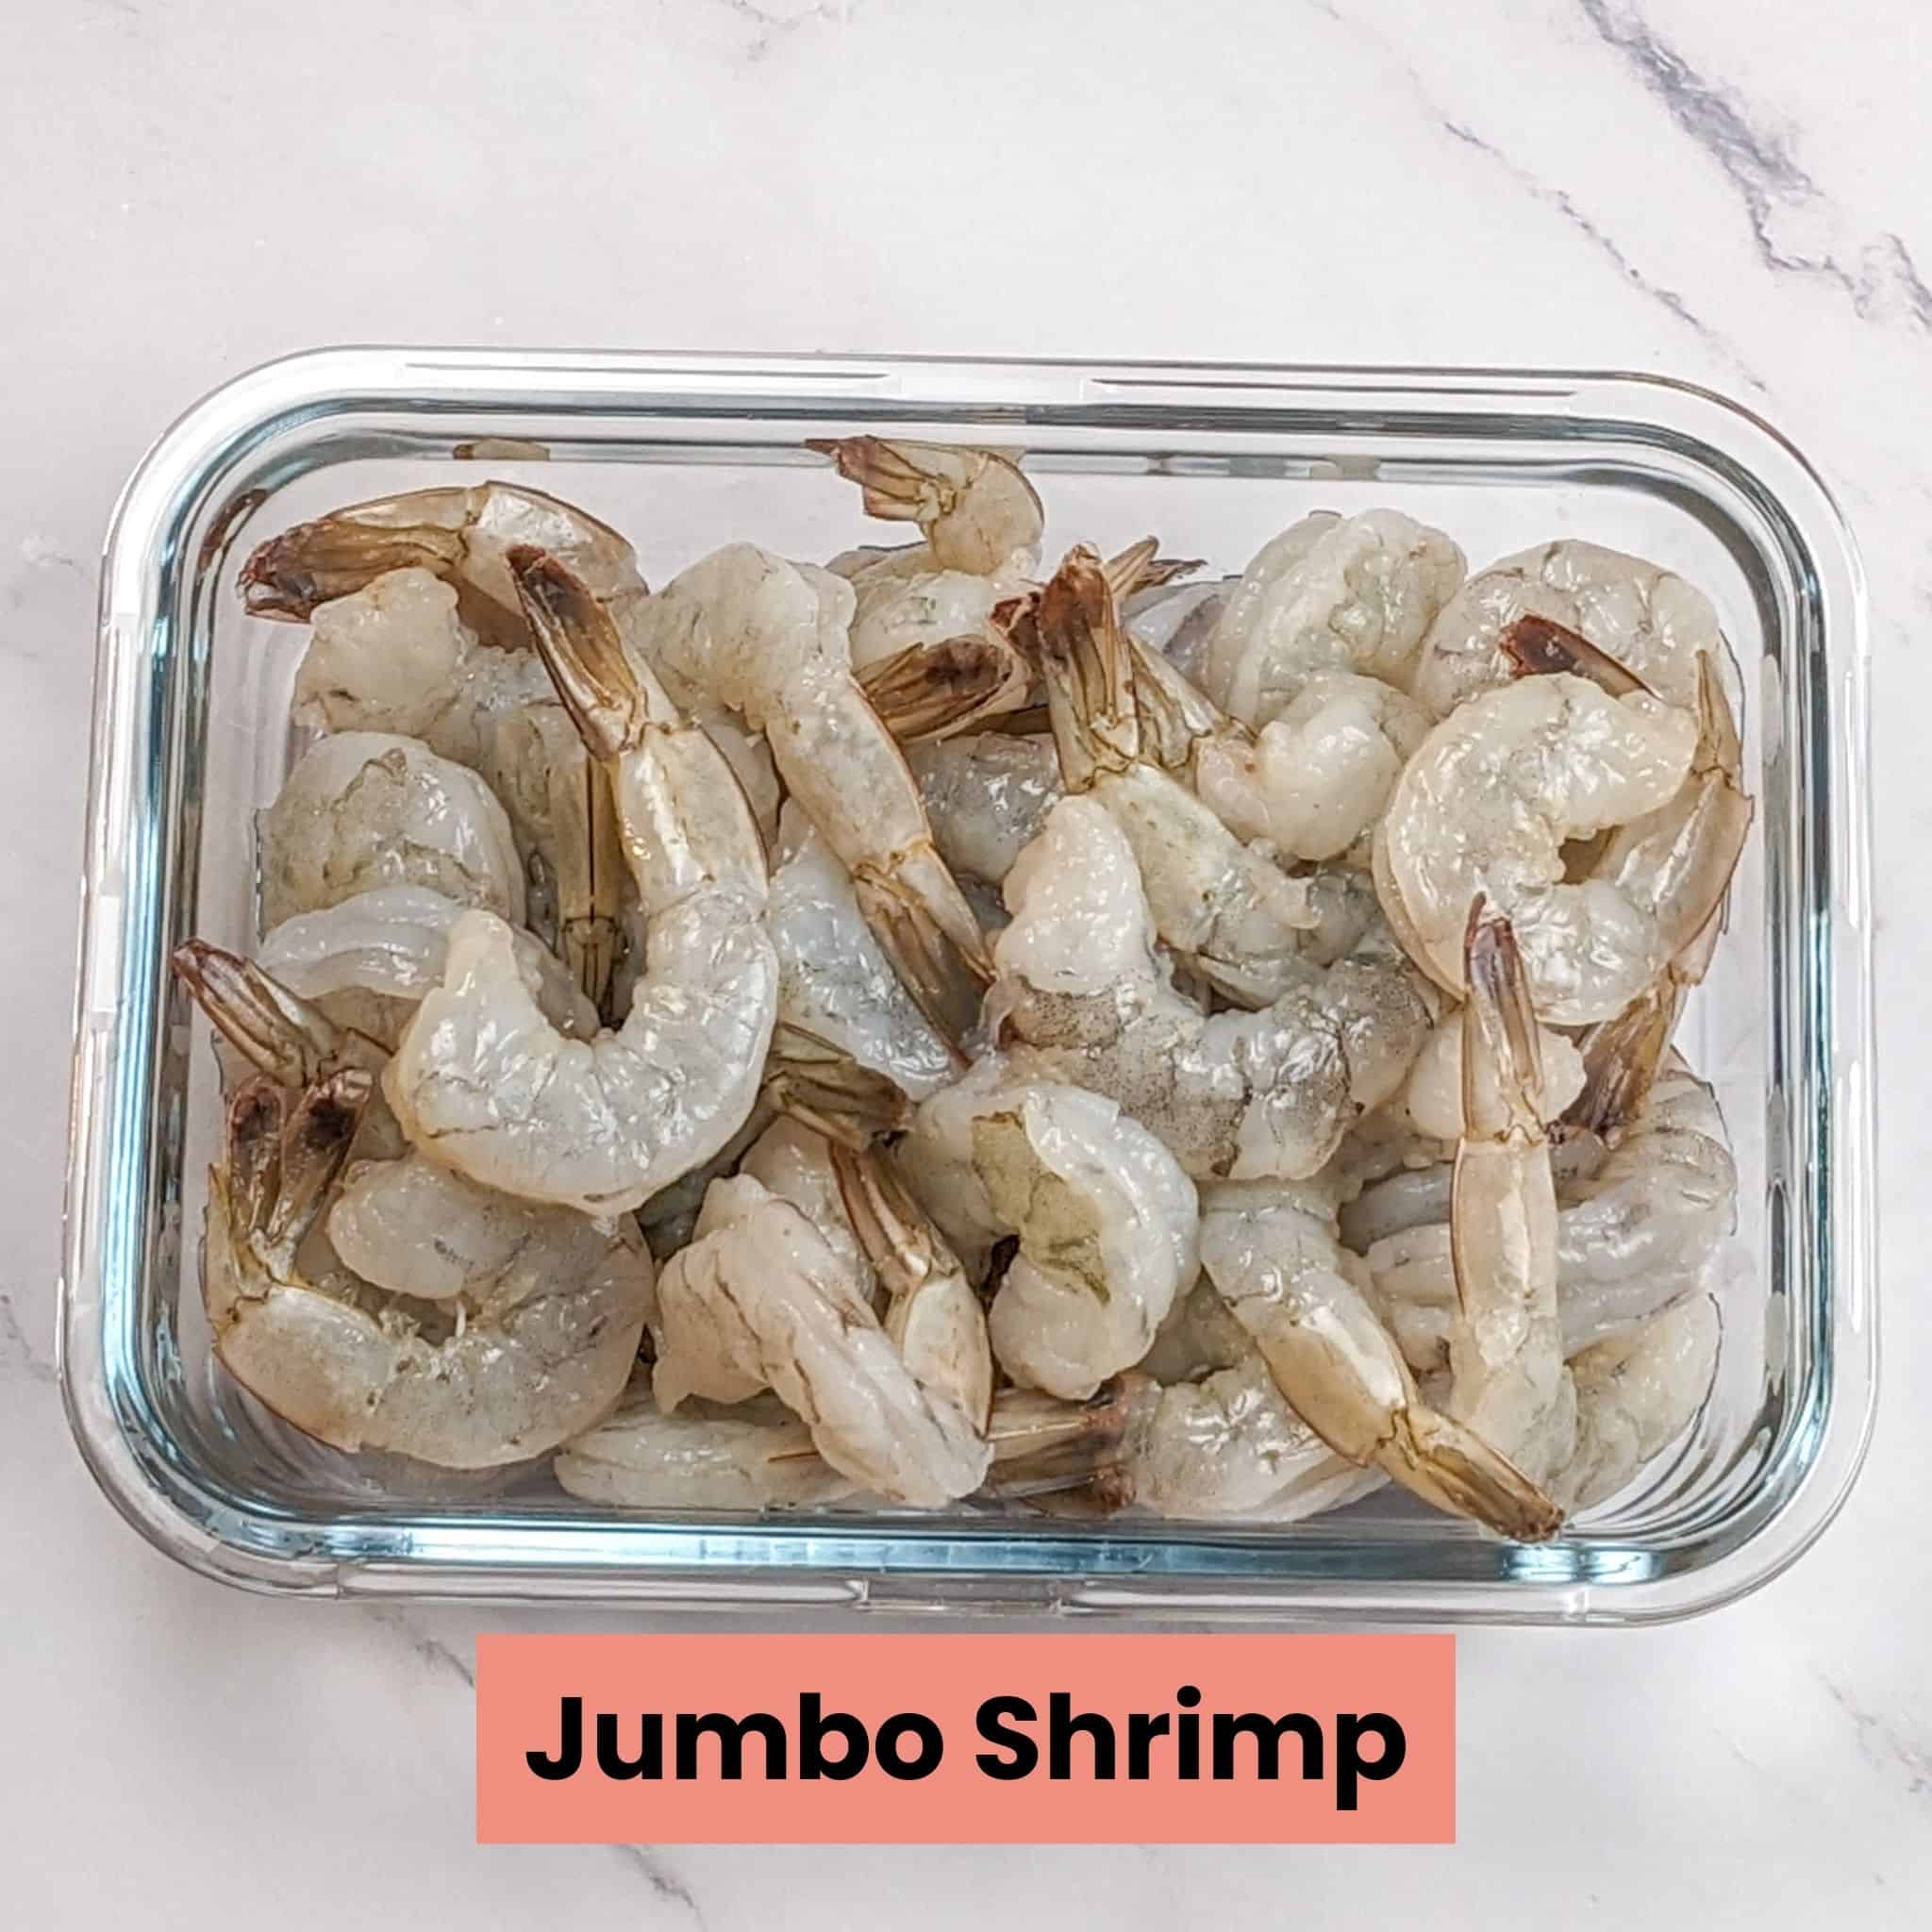 jumbo deveined and shelled shrimp in a glass rectangle container.